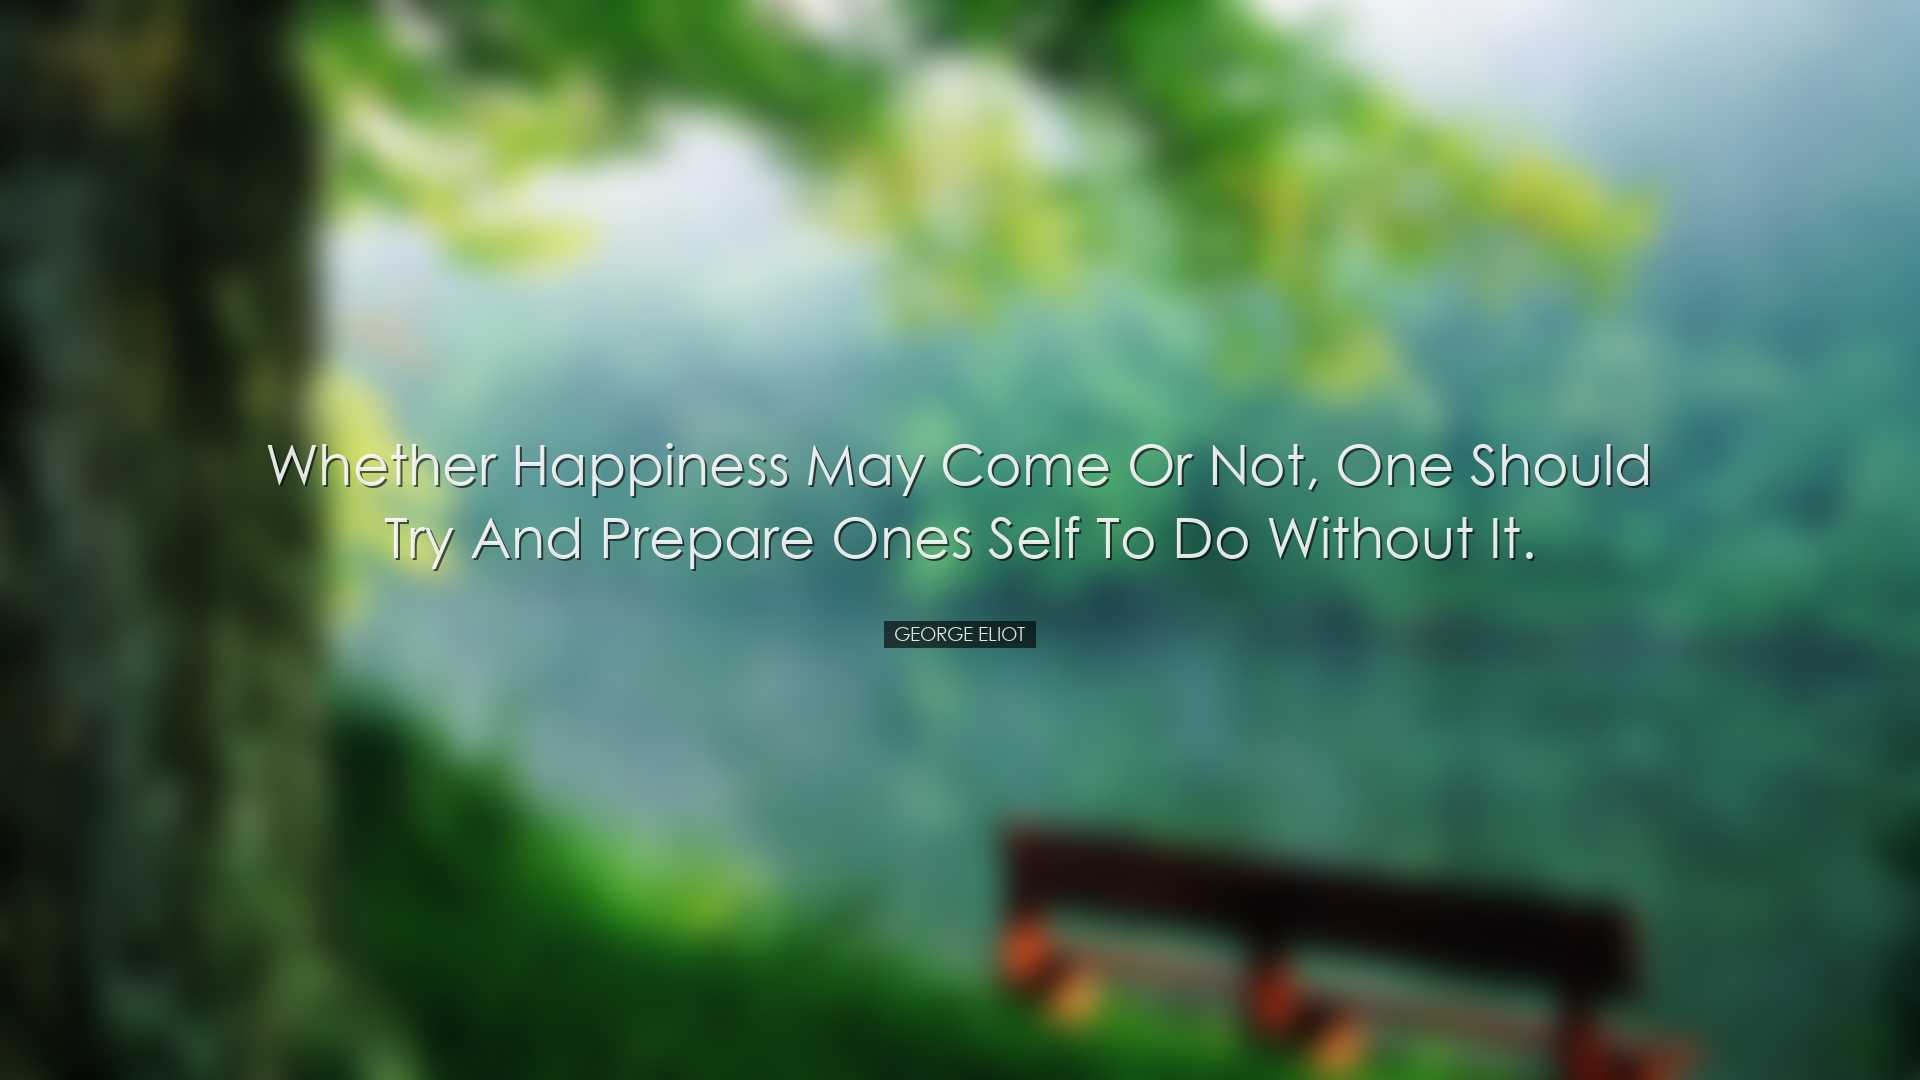 Whether happiness may come or not, one should try and prepare ones